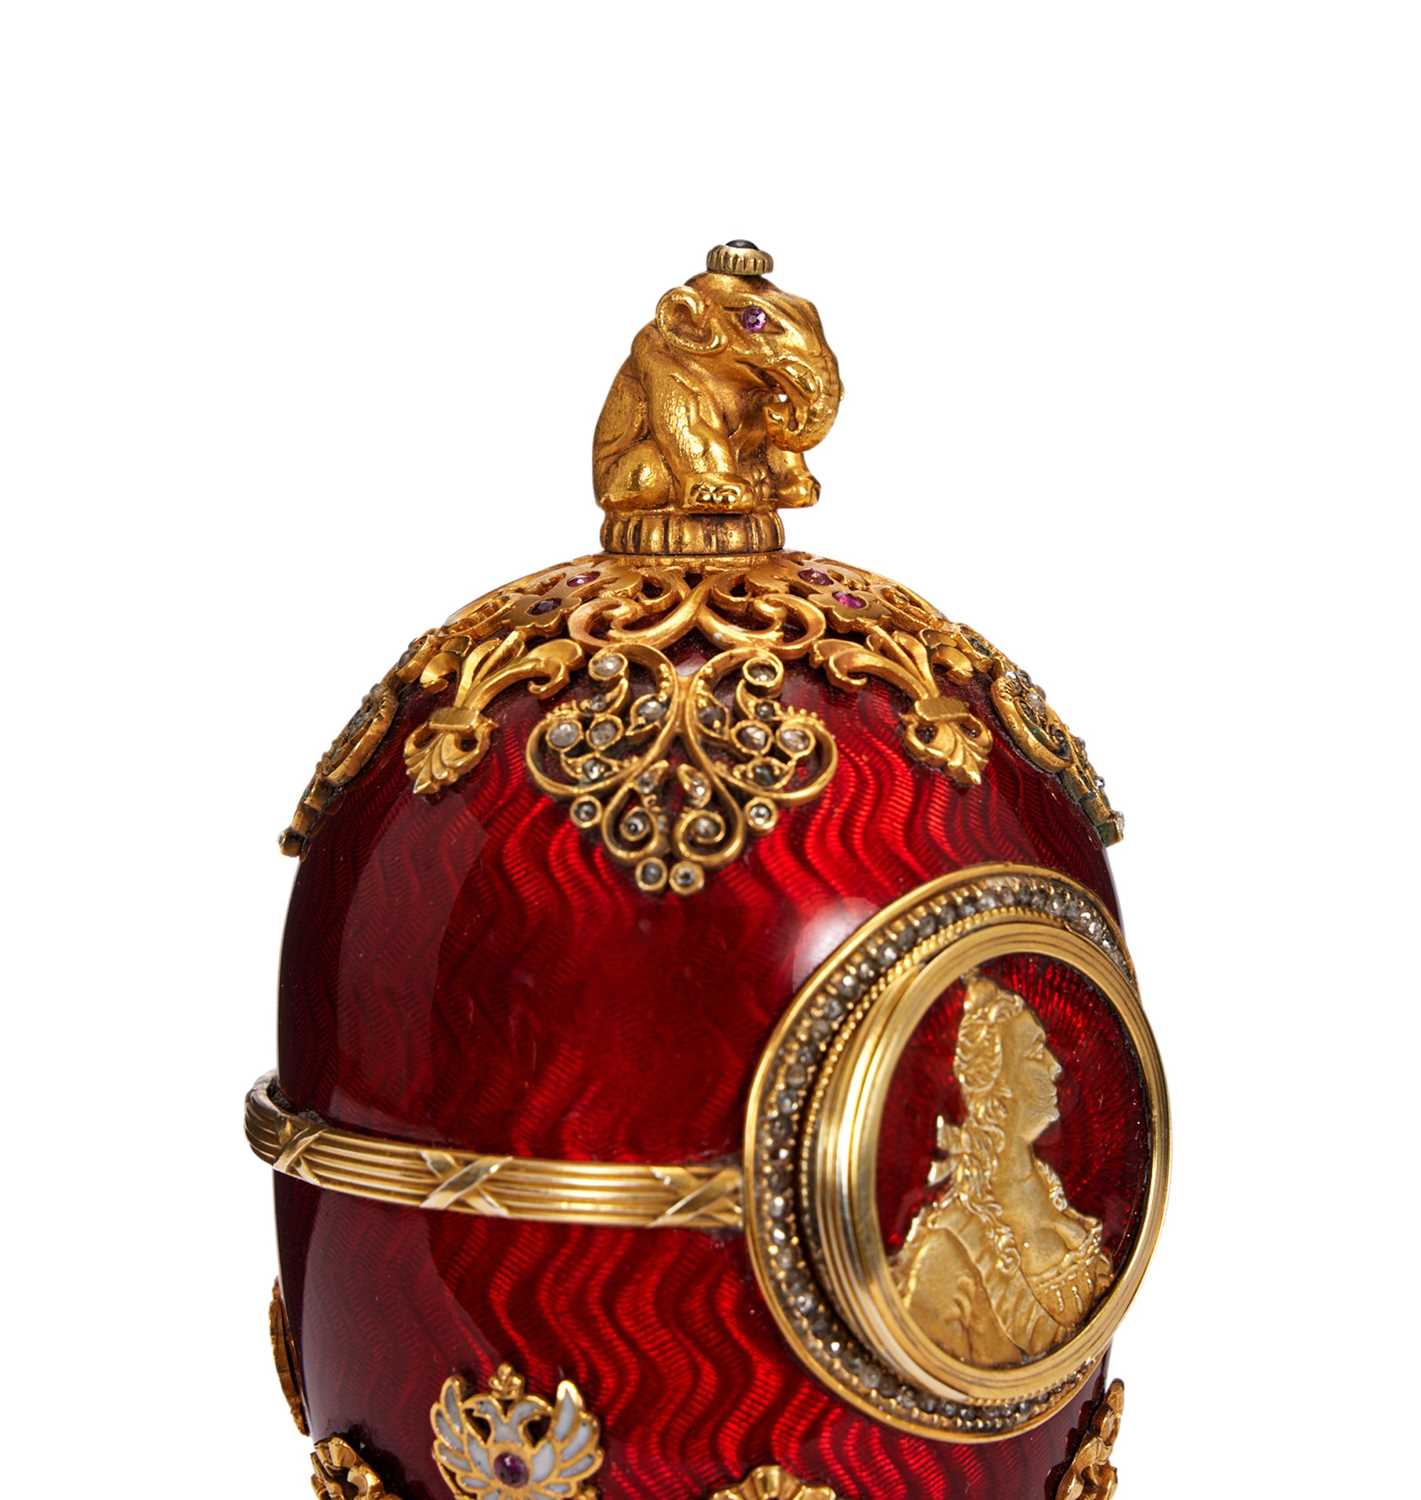 A FABERGE STYLE DIAMOND ENCRUSTED, GUILLOCHE ENAMEL AND SILVER GILT EGG - Image 4 of 6